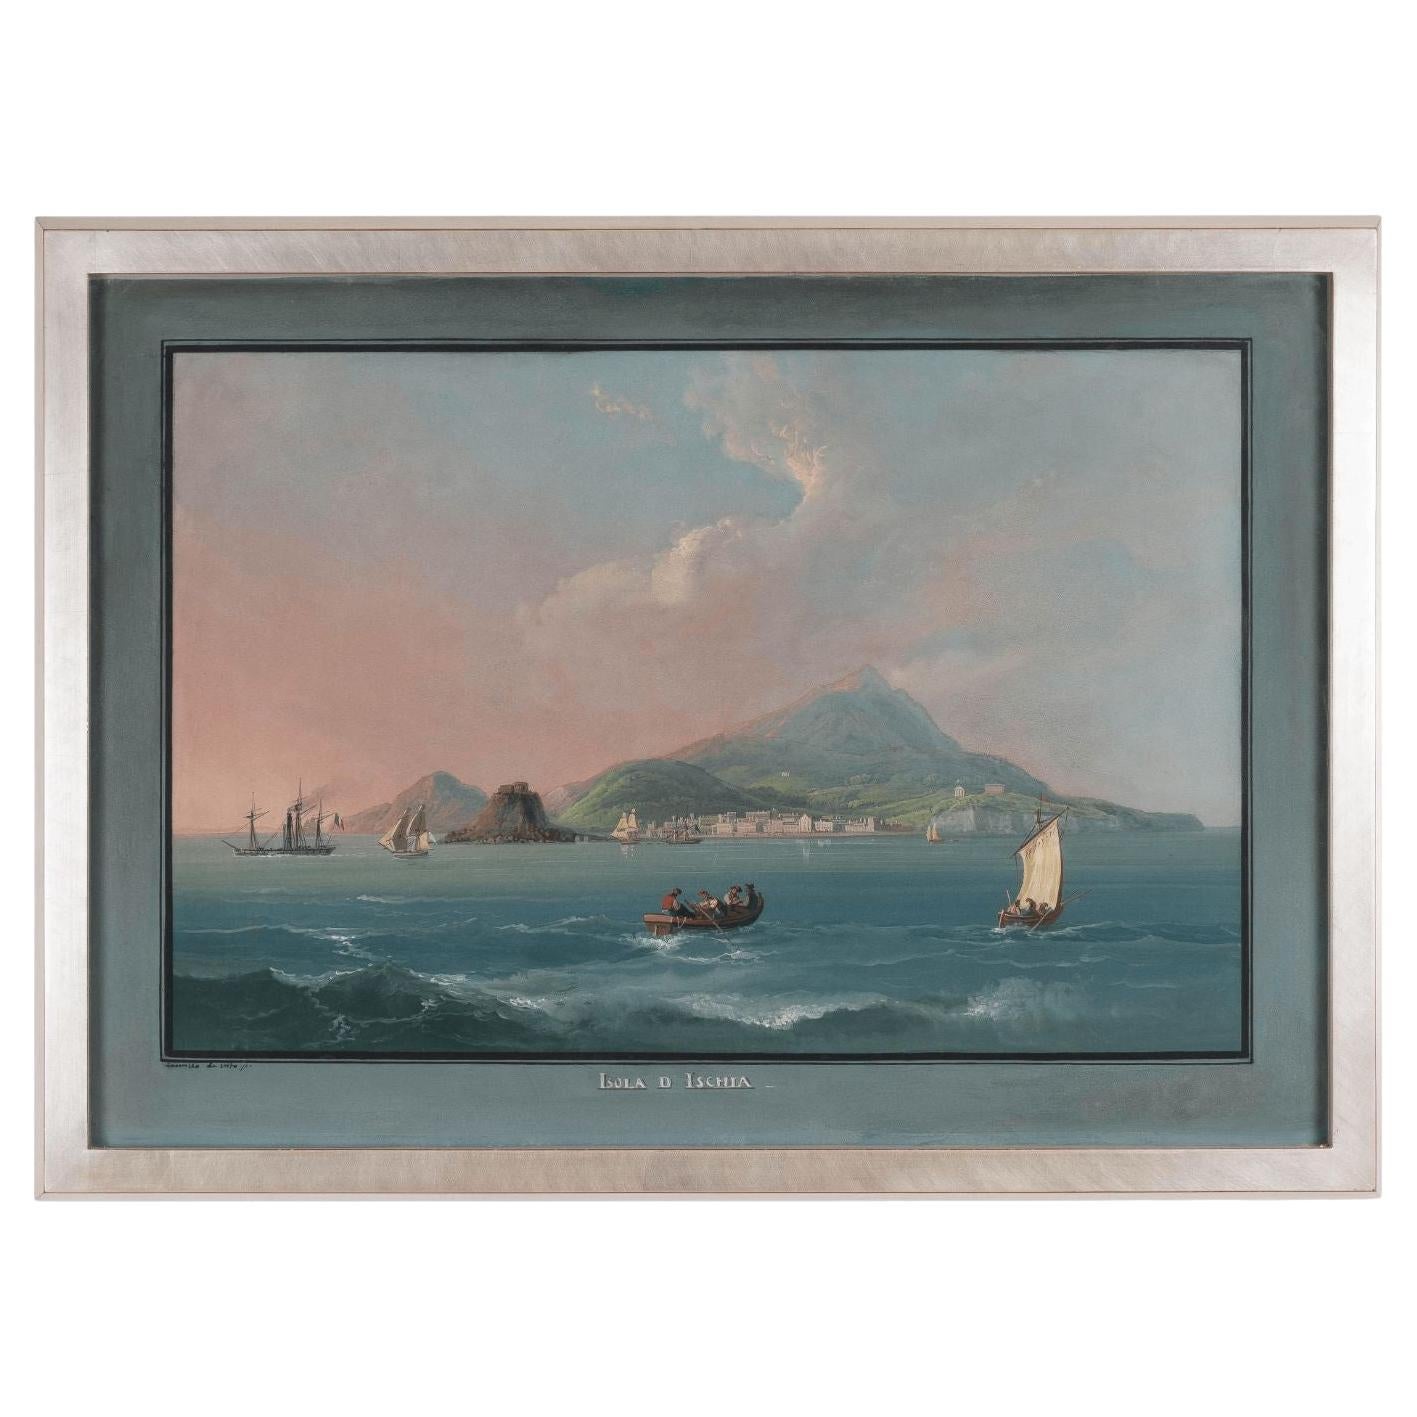 "Isola D’Ischia" Grand Tour Style Gouache Painting by Camillo Divito, c. 1815